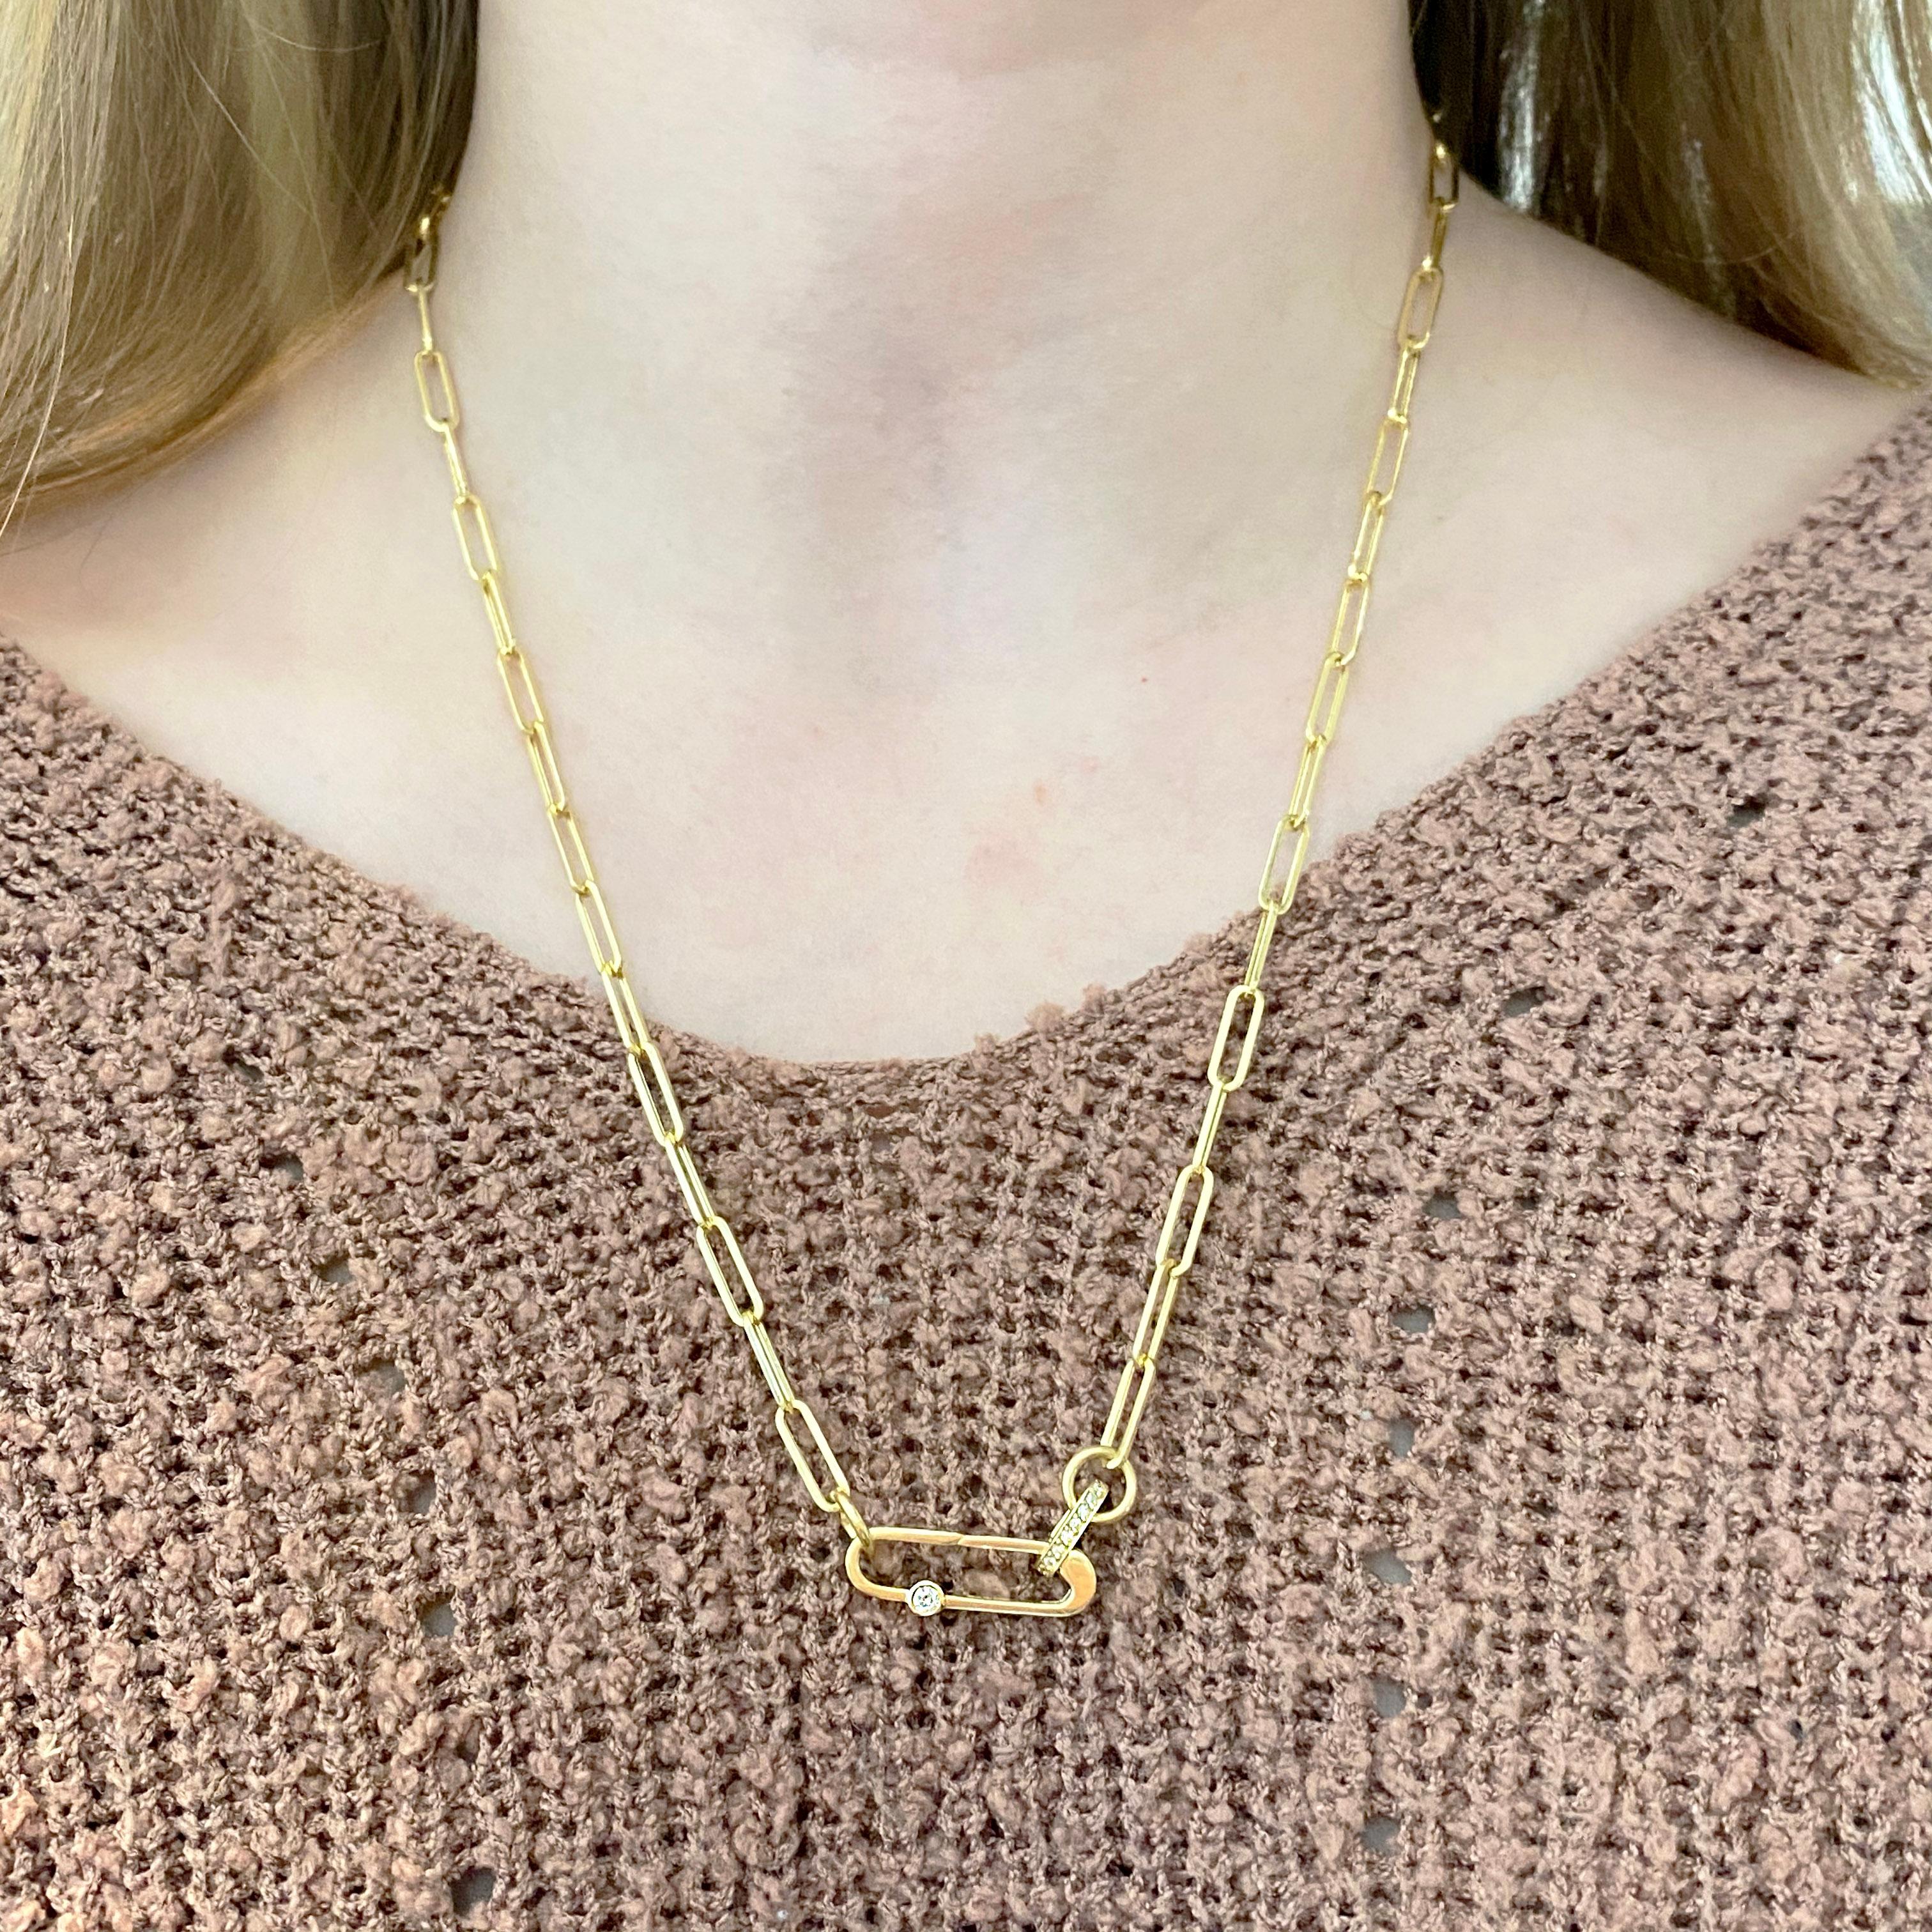 bobby pin necklace